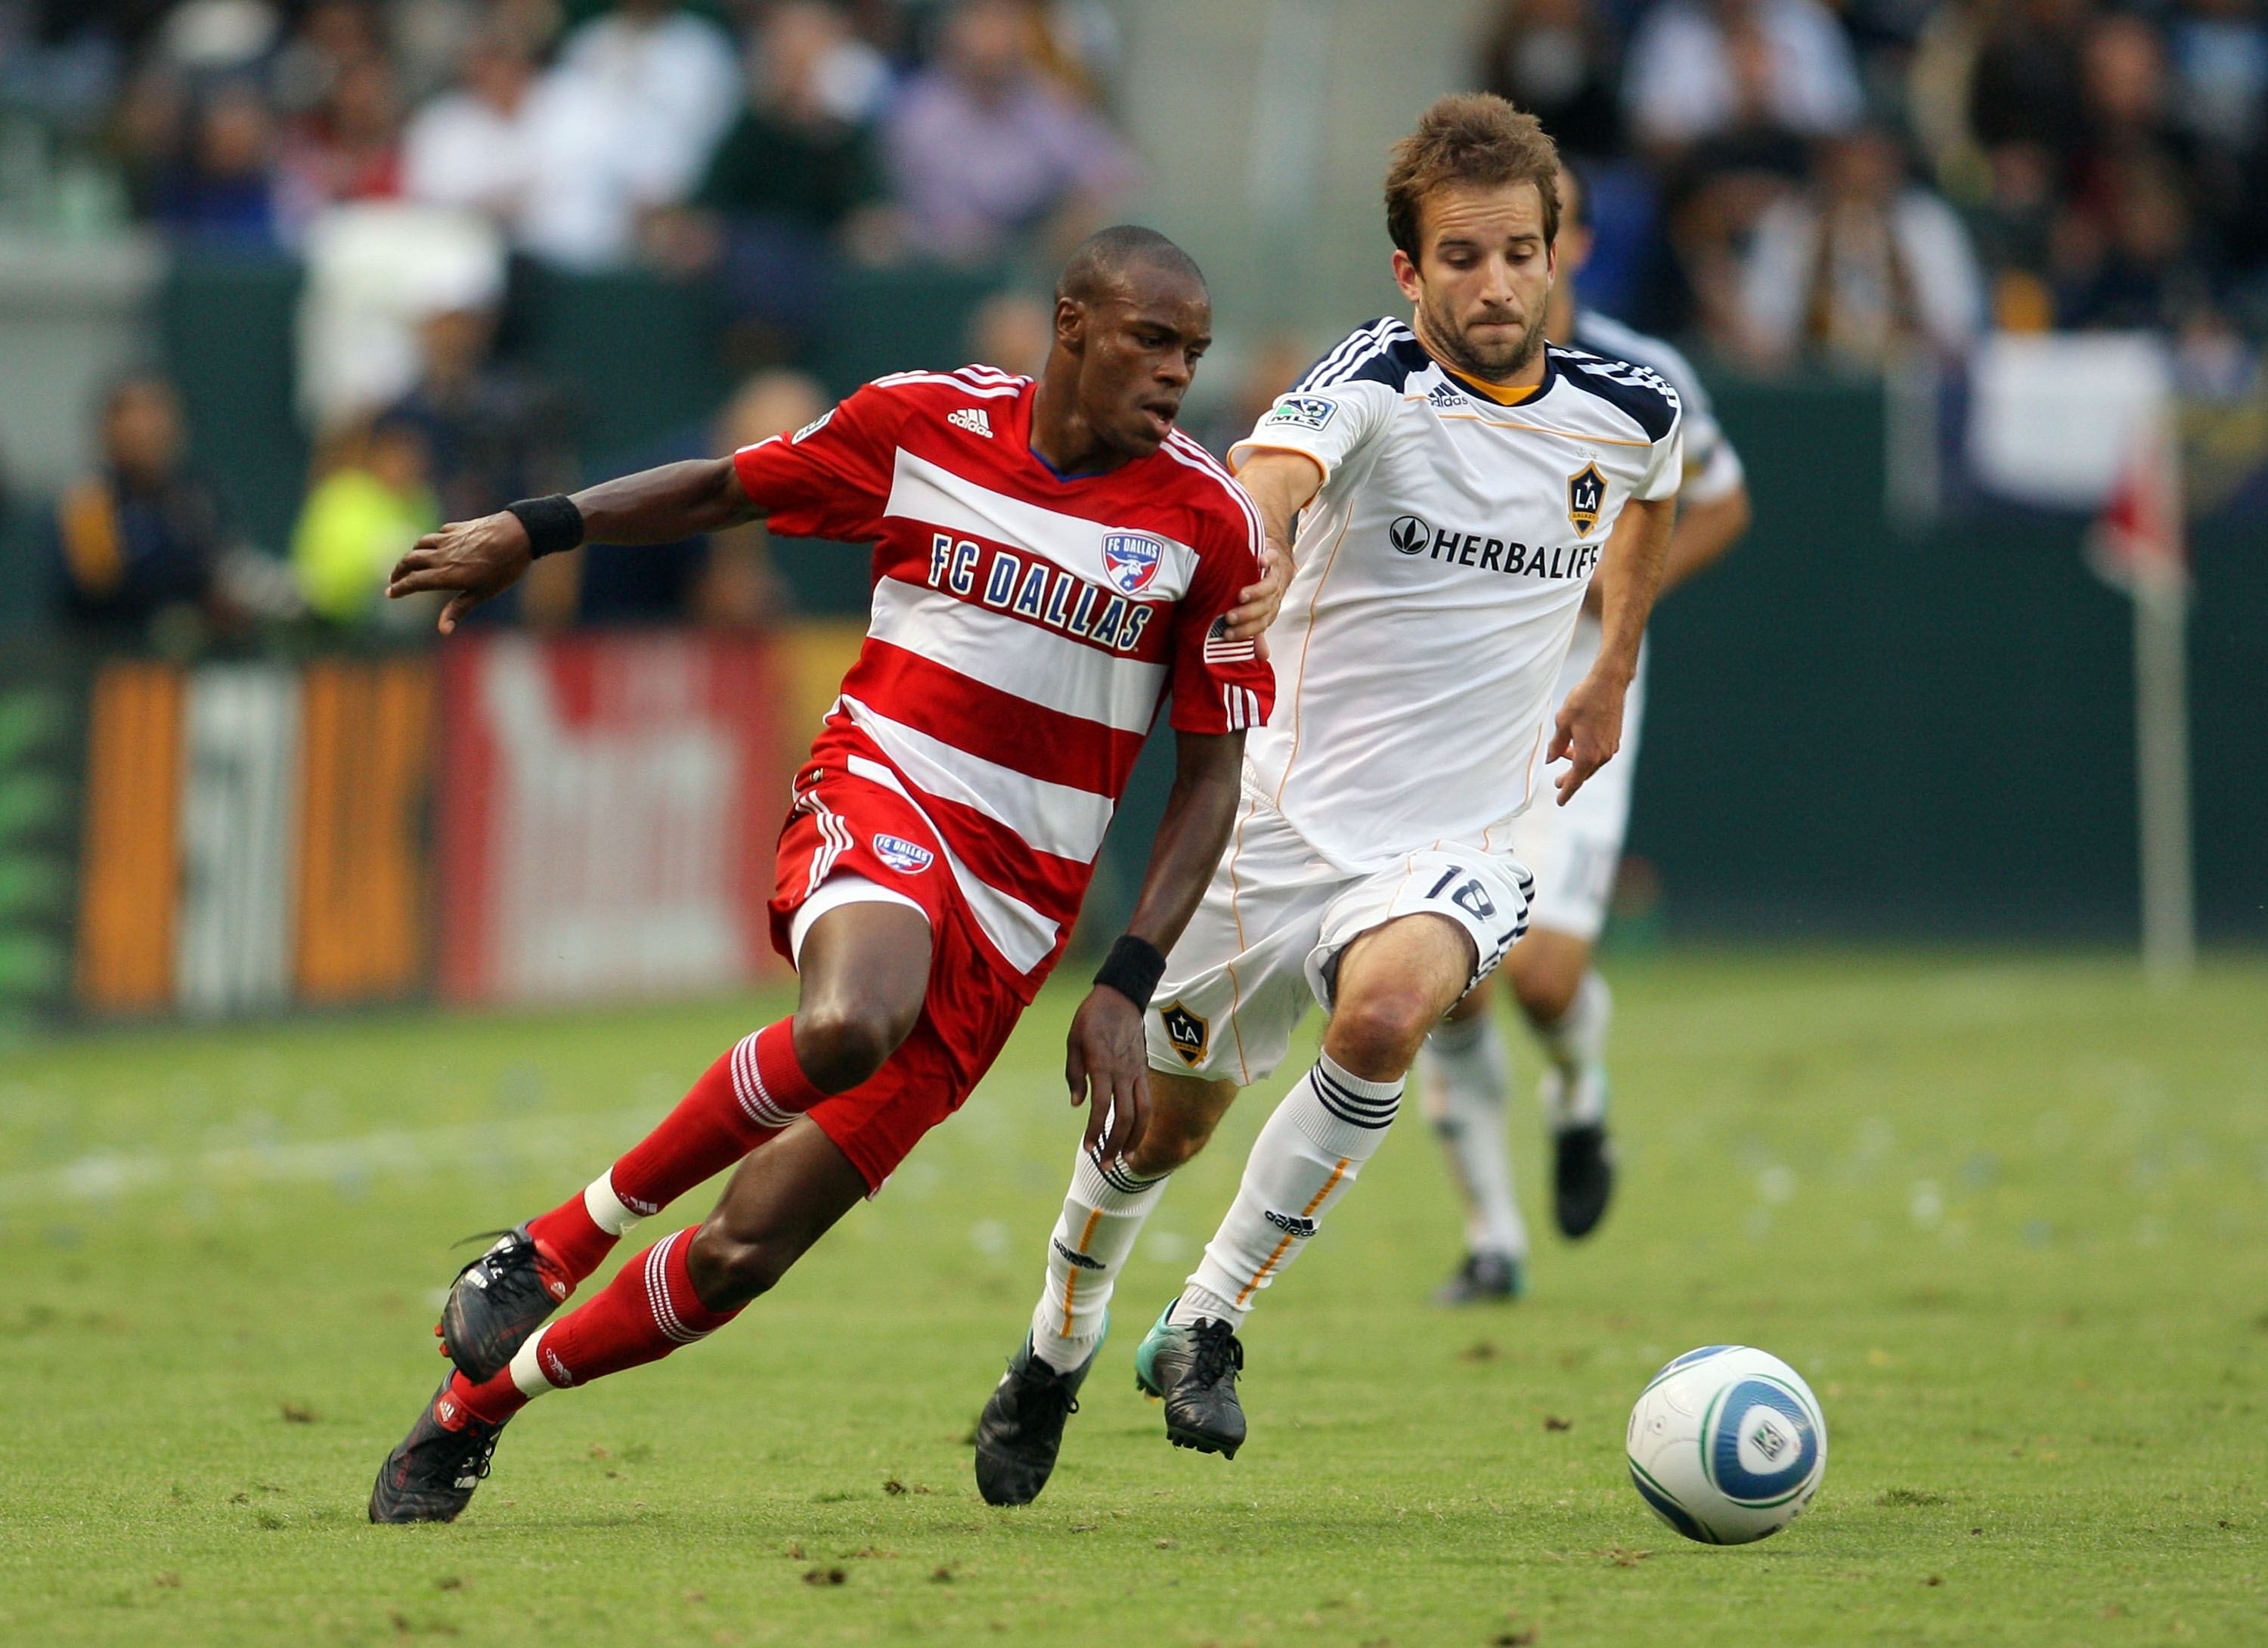 CARSON, CA - OCTOBER 24:  Jackson Goncalves #6 of FC Dallas and Mike Magee #18 of the Los Angeles Galaxy vie for position to the ball in the first half during the MLS match on October 24, 2010 in Carson, California.  (Photo by Victor Decolongon/Getty Imag